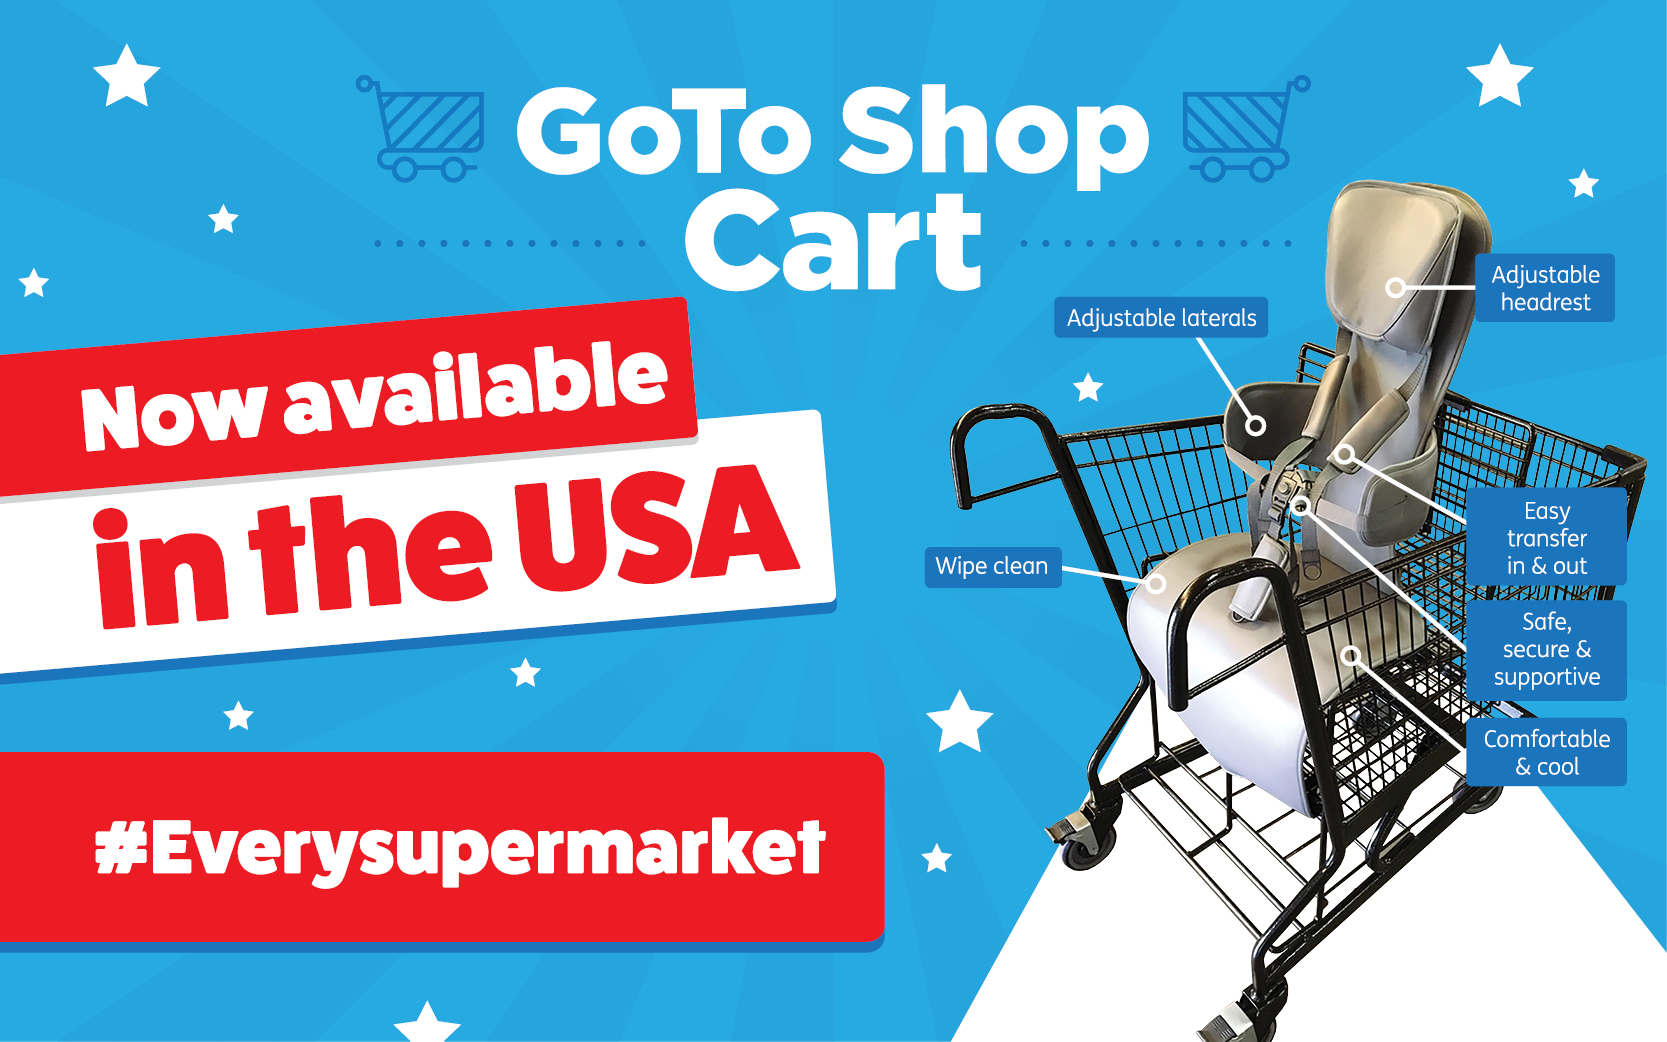 The GoTo Shop Cart is now available in the US!